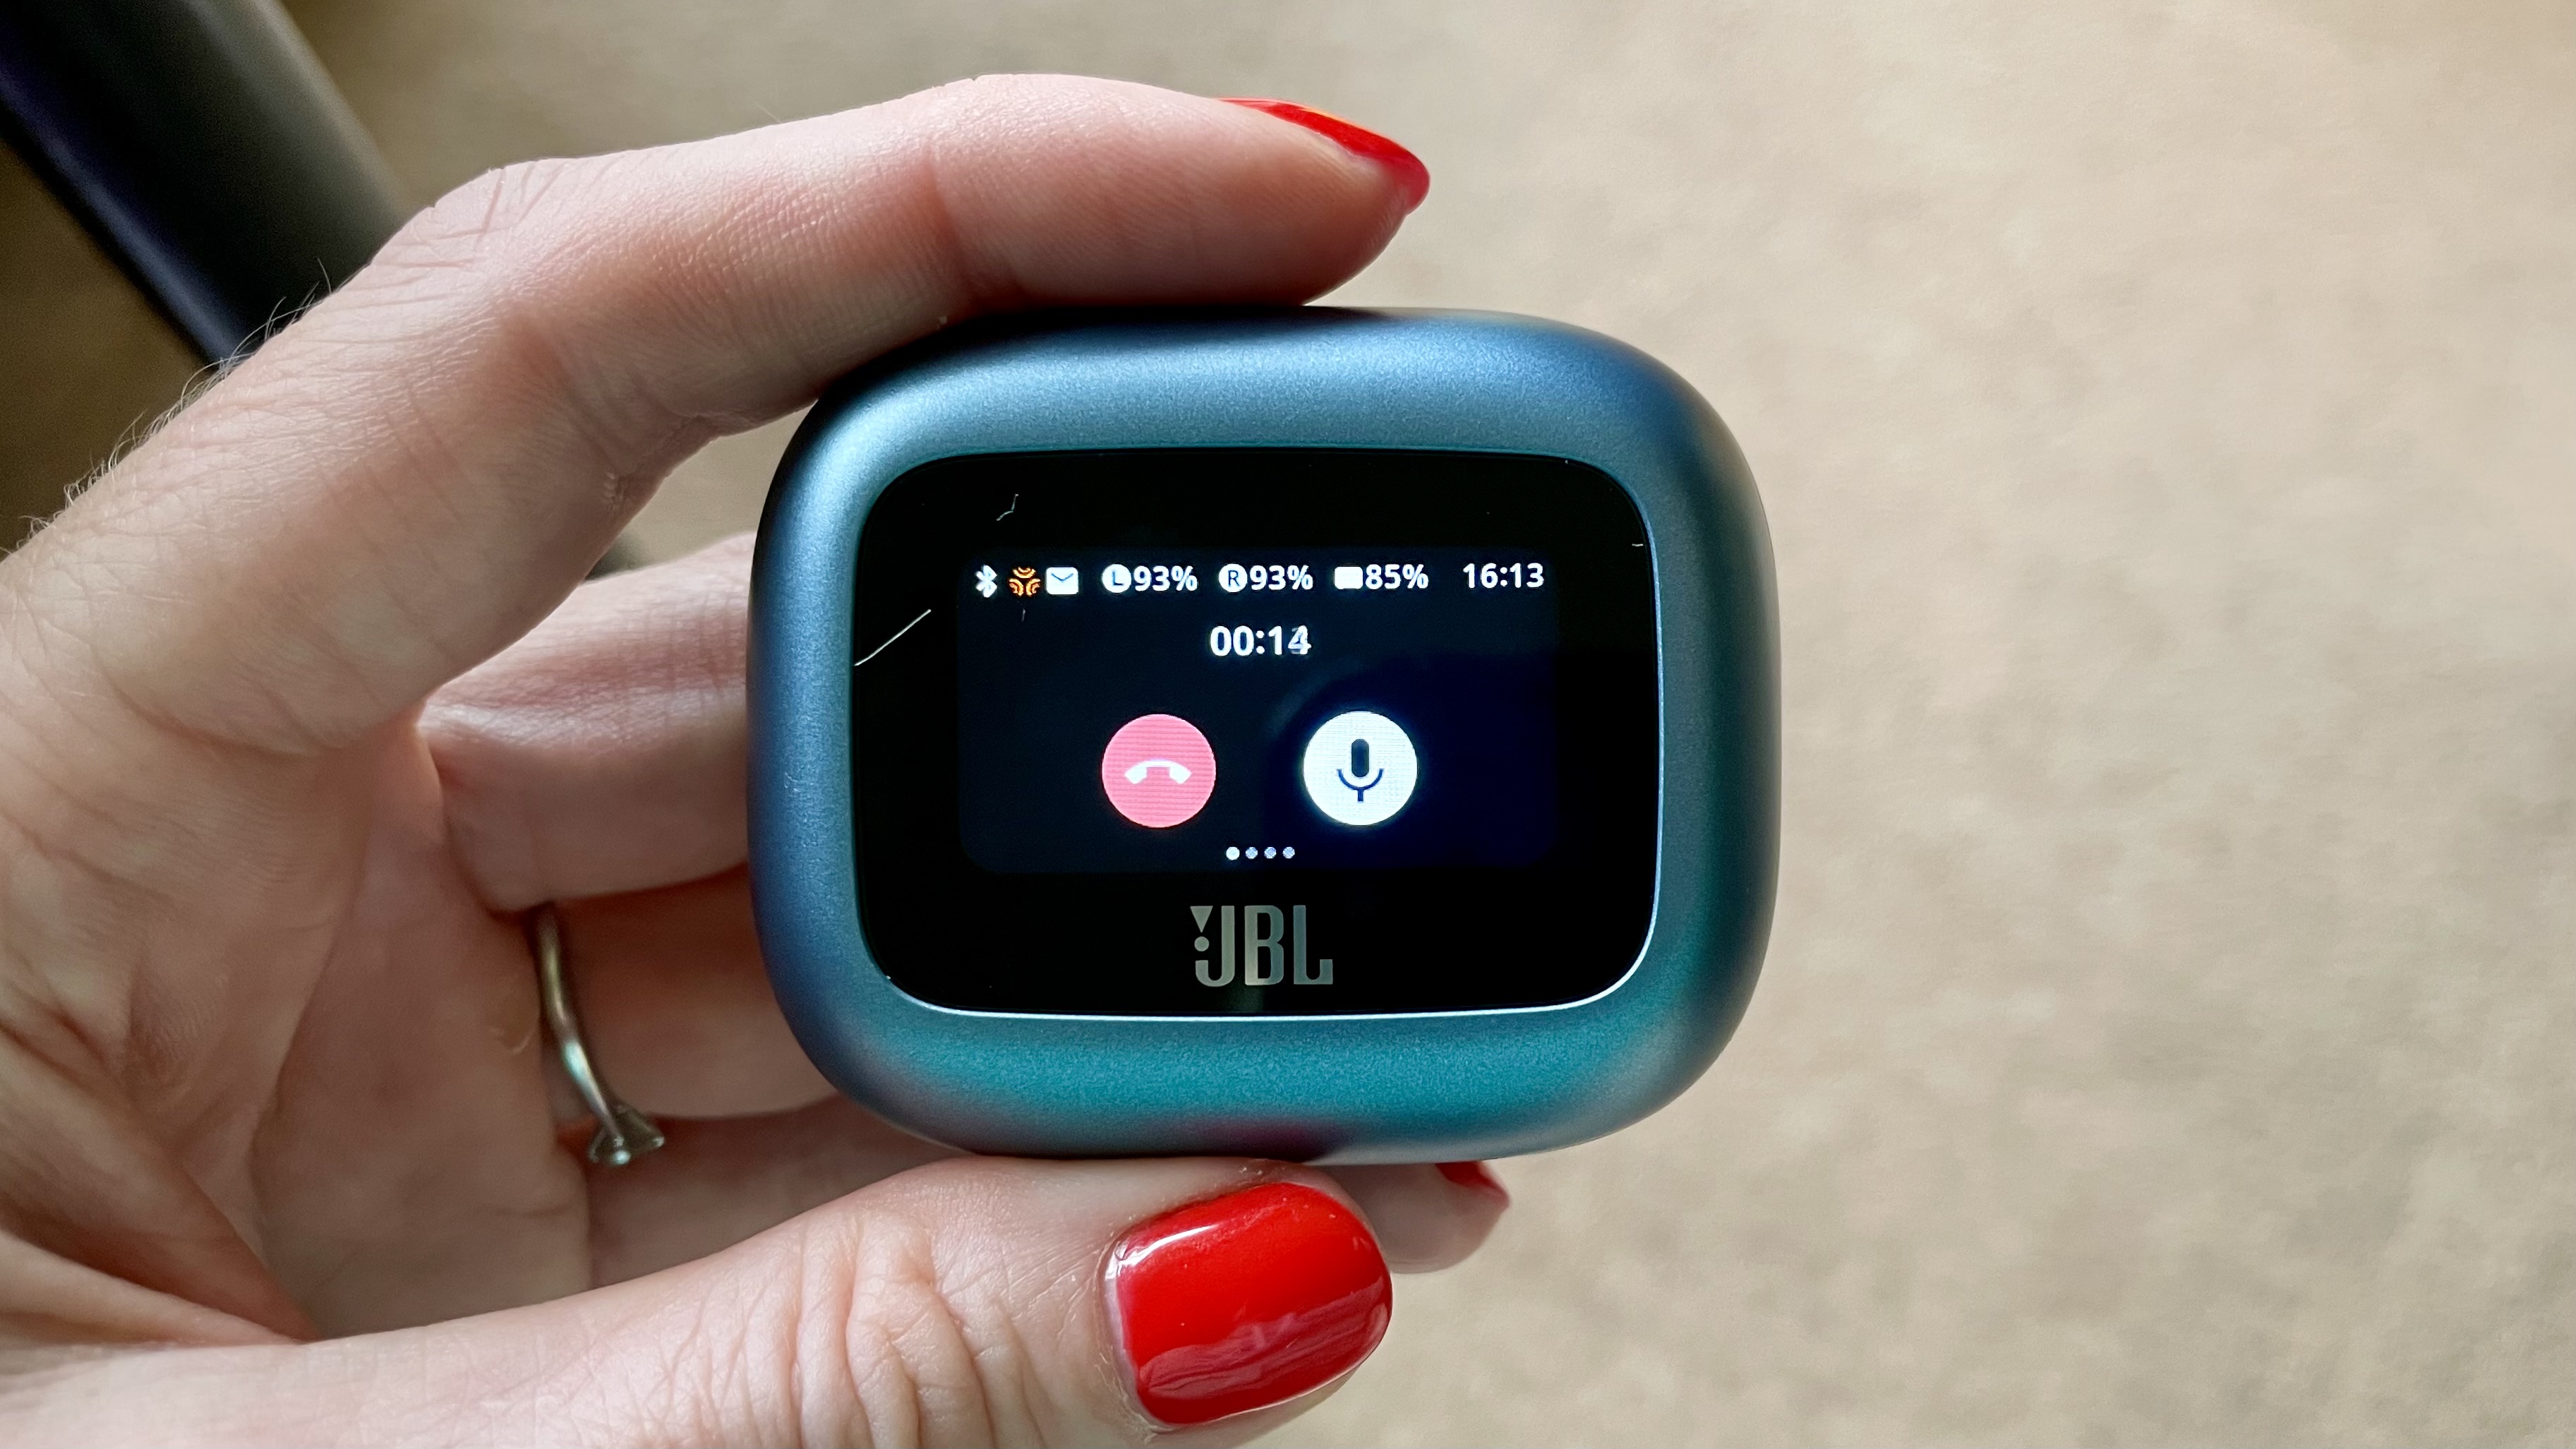 JBL Live Beam 3, showing an incoming call, case held in a hand with red fingernails